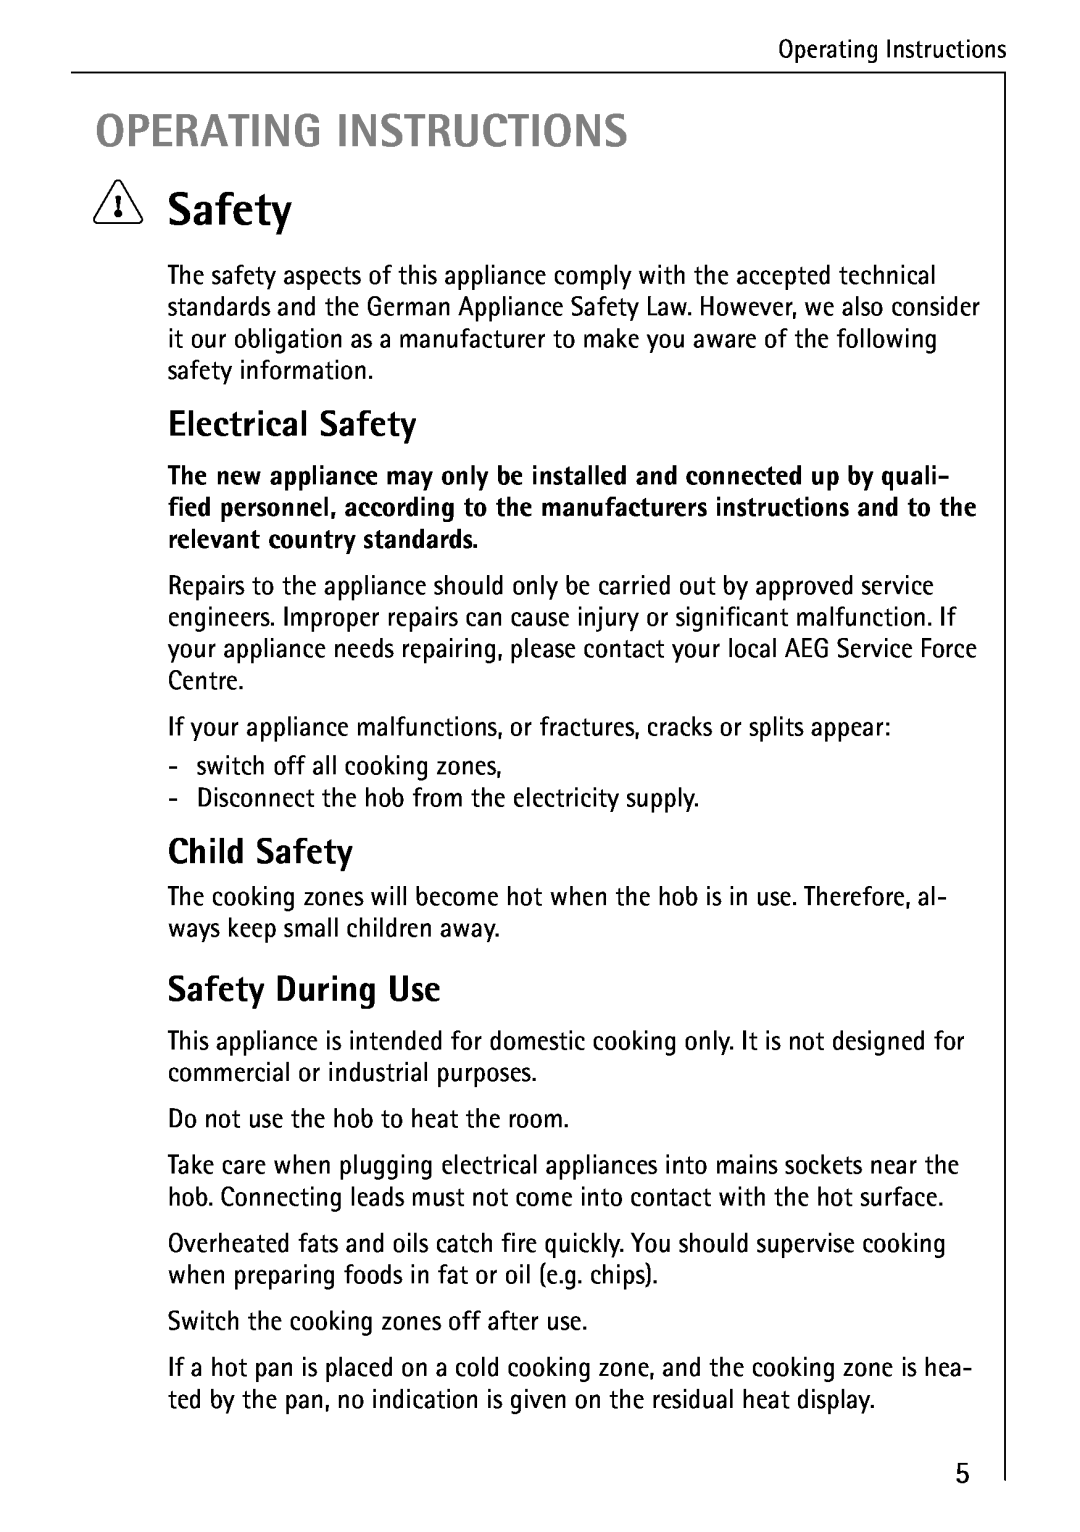 Electrolux 65300KF-an operating instructions Operating Instructions, Electrical Safety, Child Safety, Safety During Use 